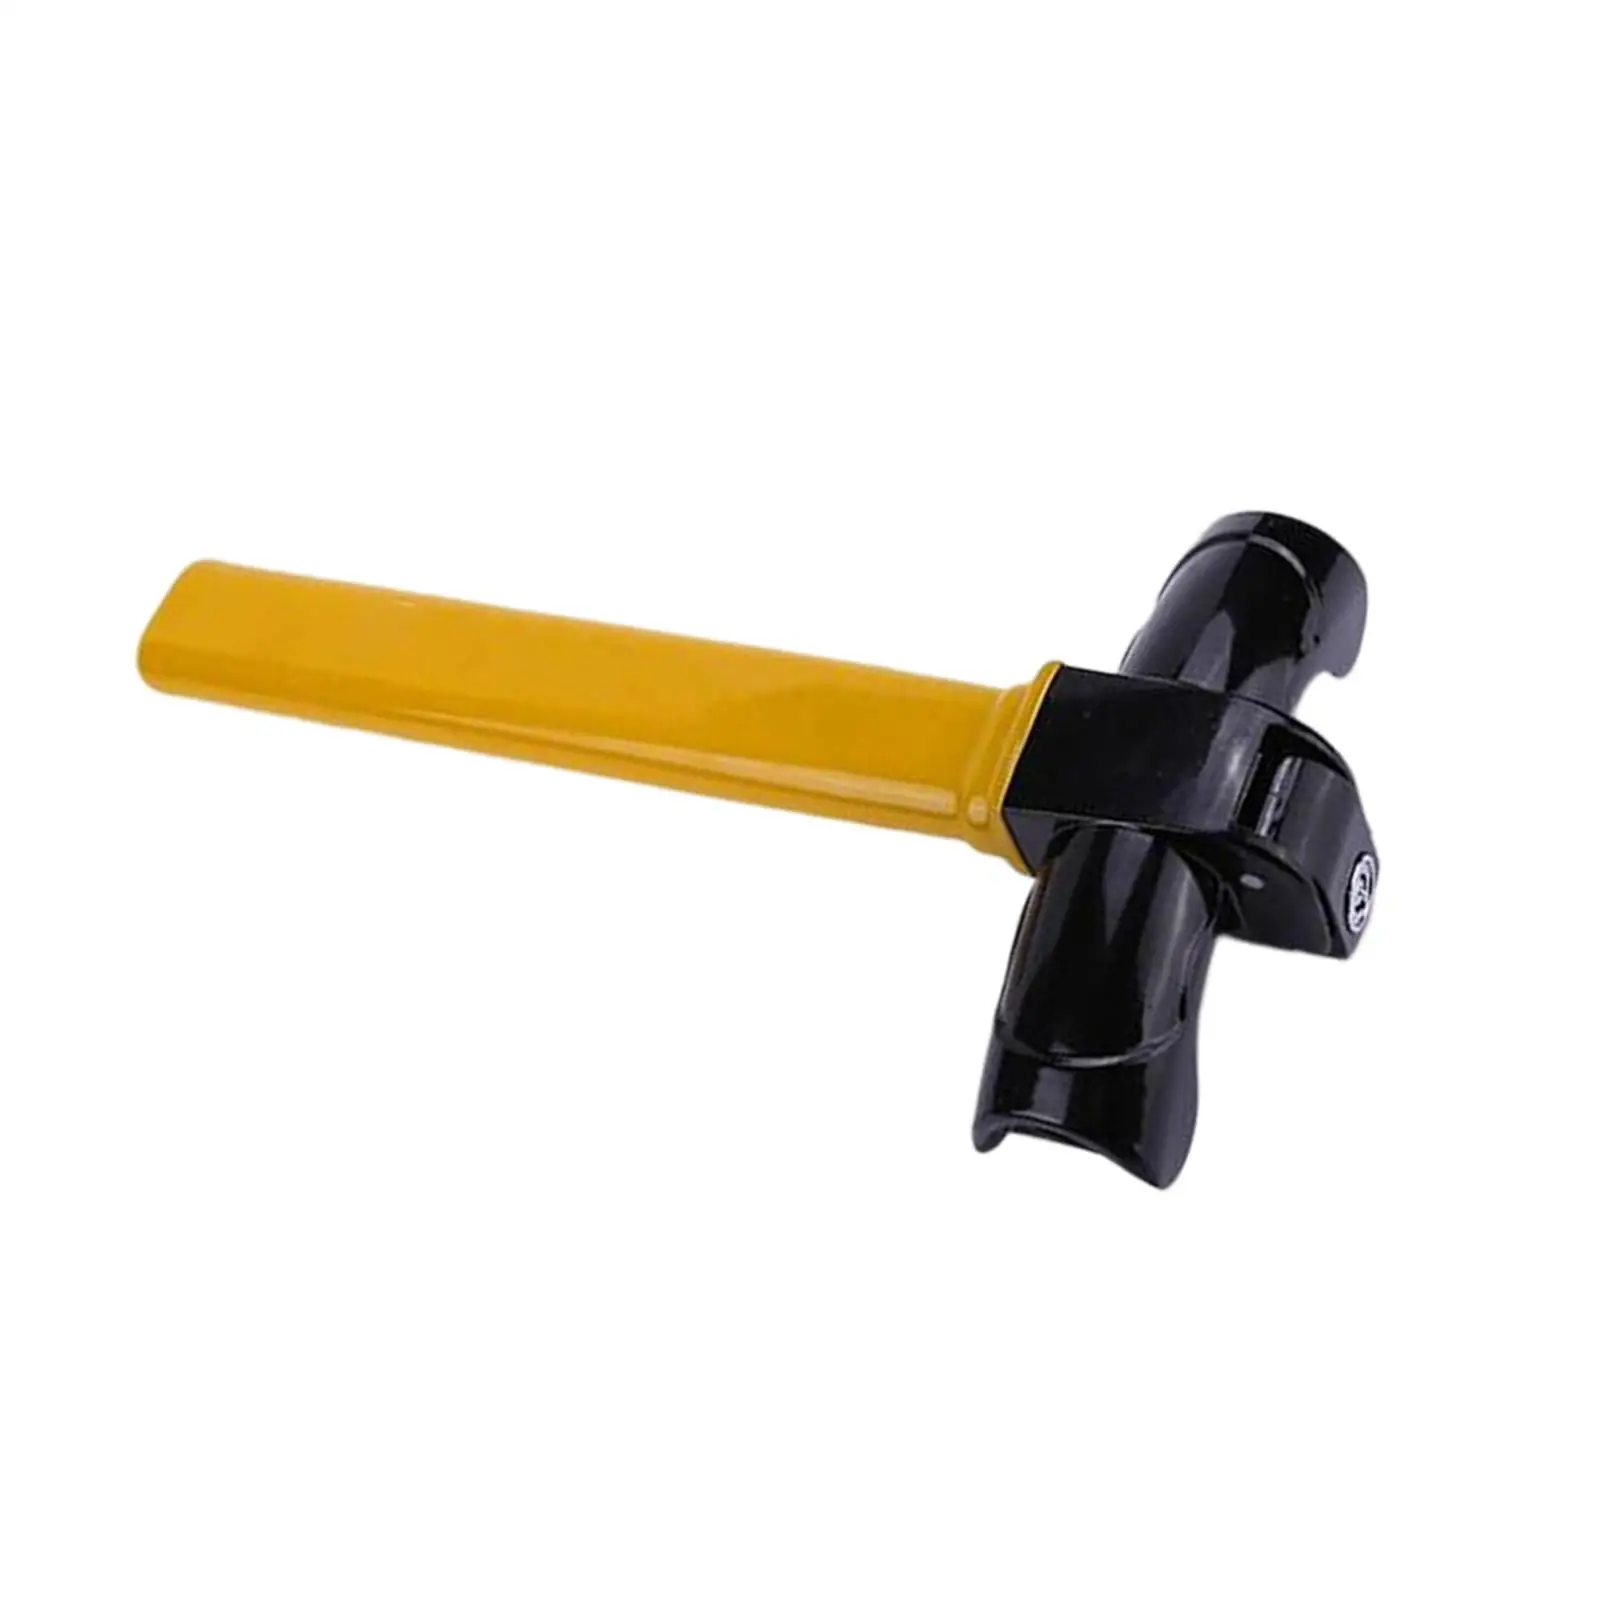 Automotive Steering Wheel Lock Tool Durable Universal T Shaped for SUV